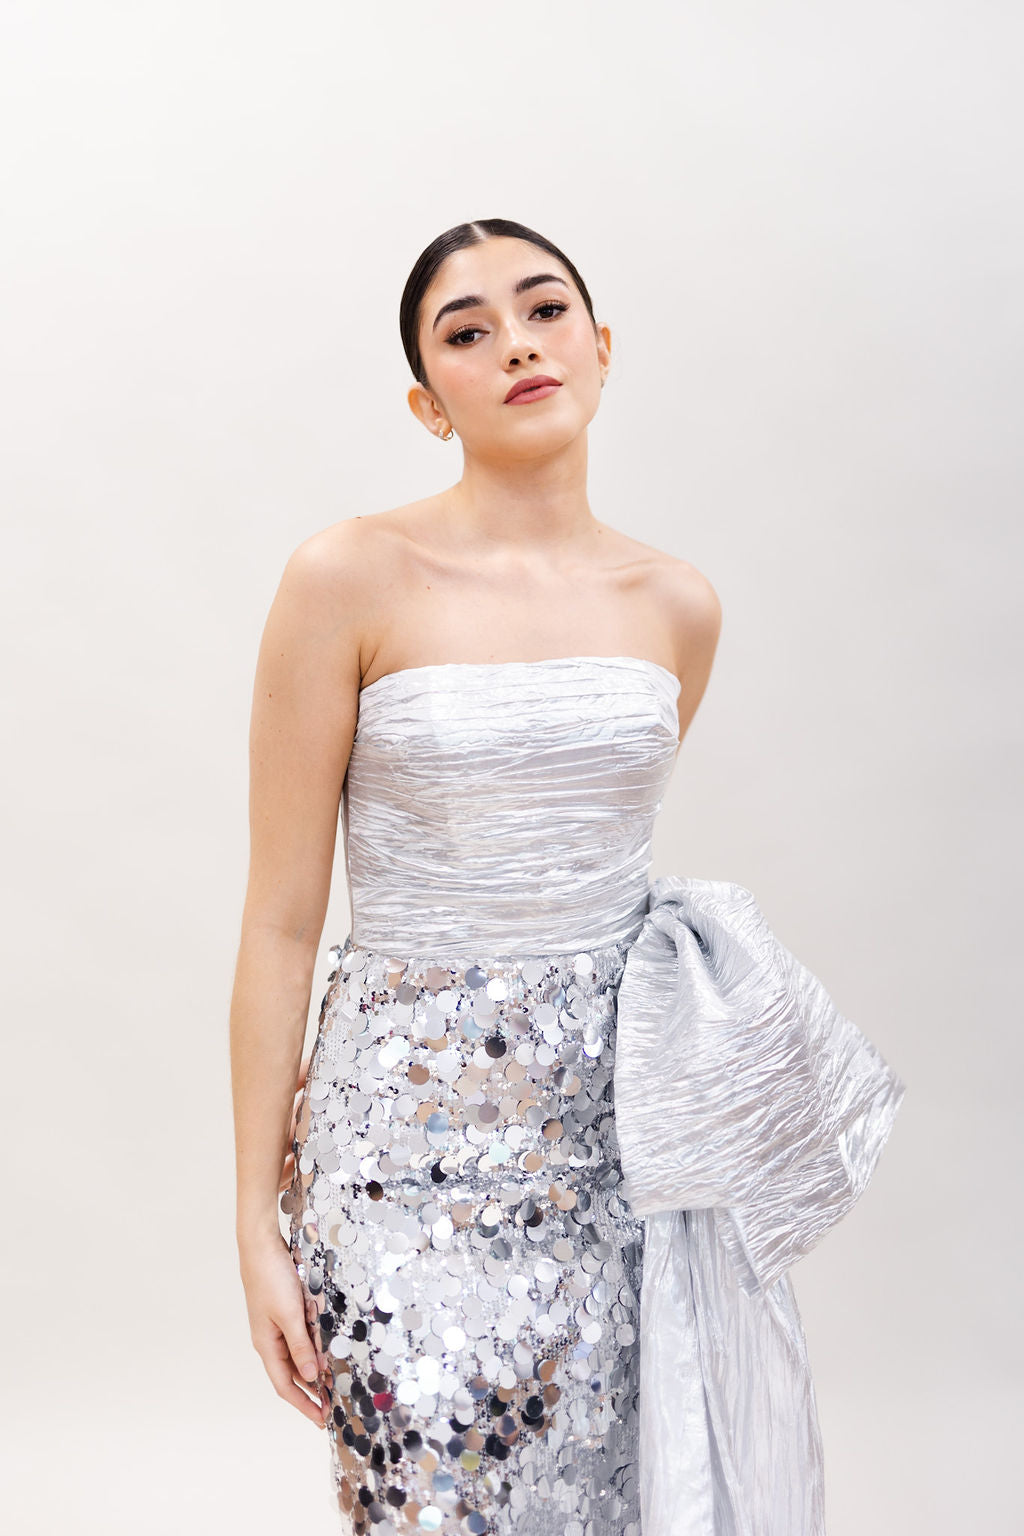 SILVER DRAPED TOP SEQUIN GOWN WITH BOW & SIDE TRAIN